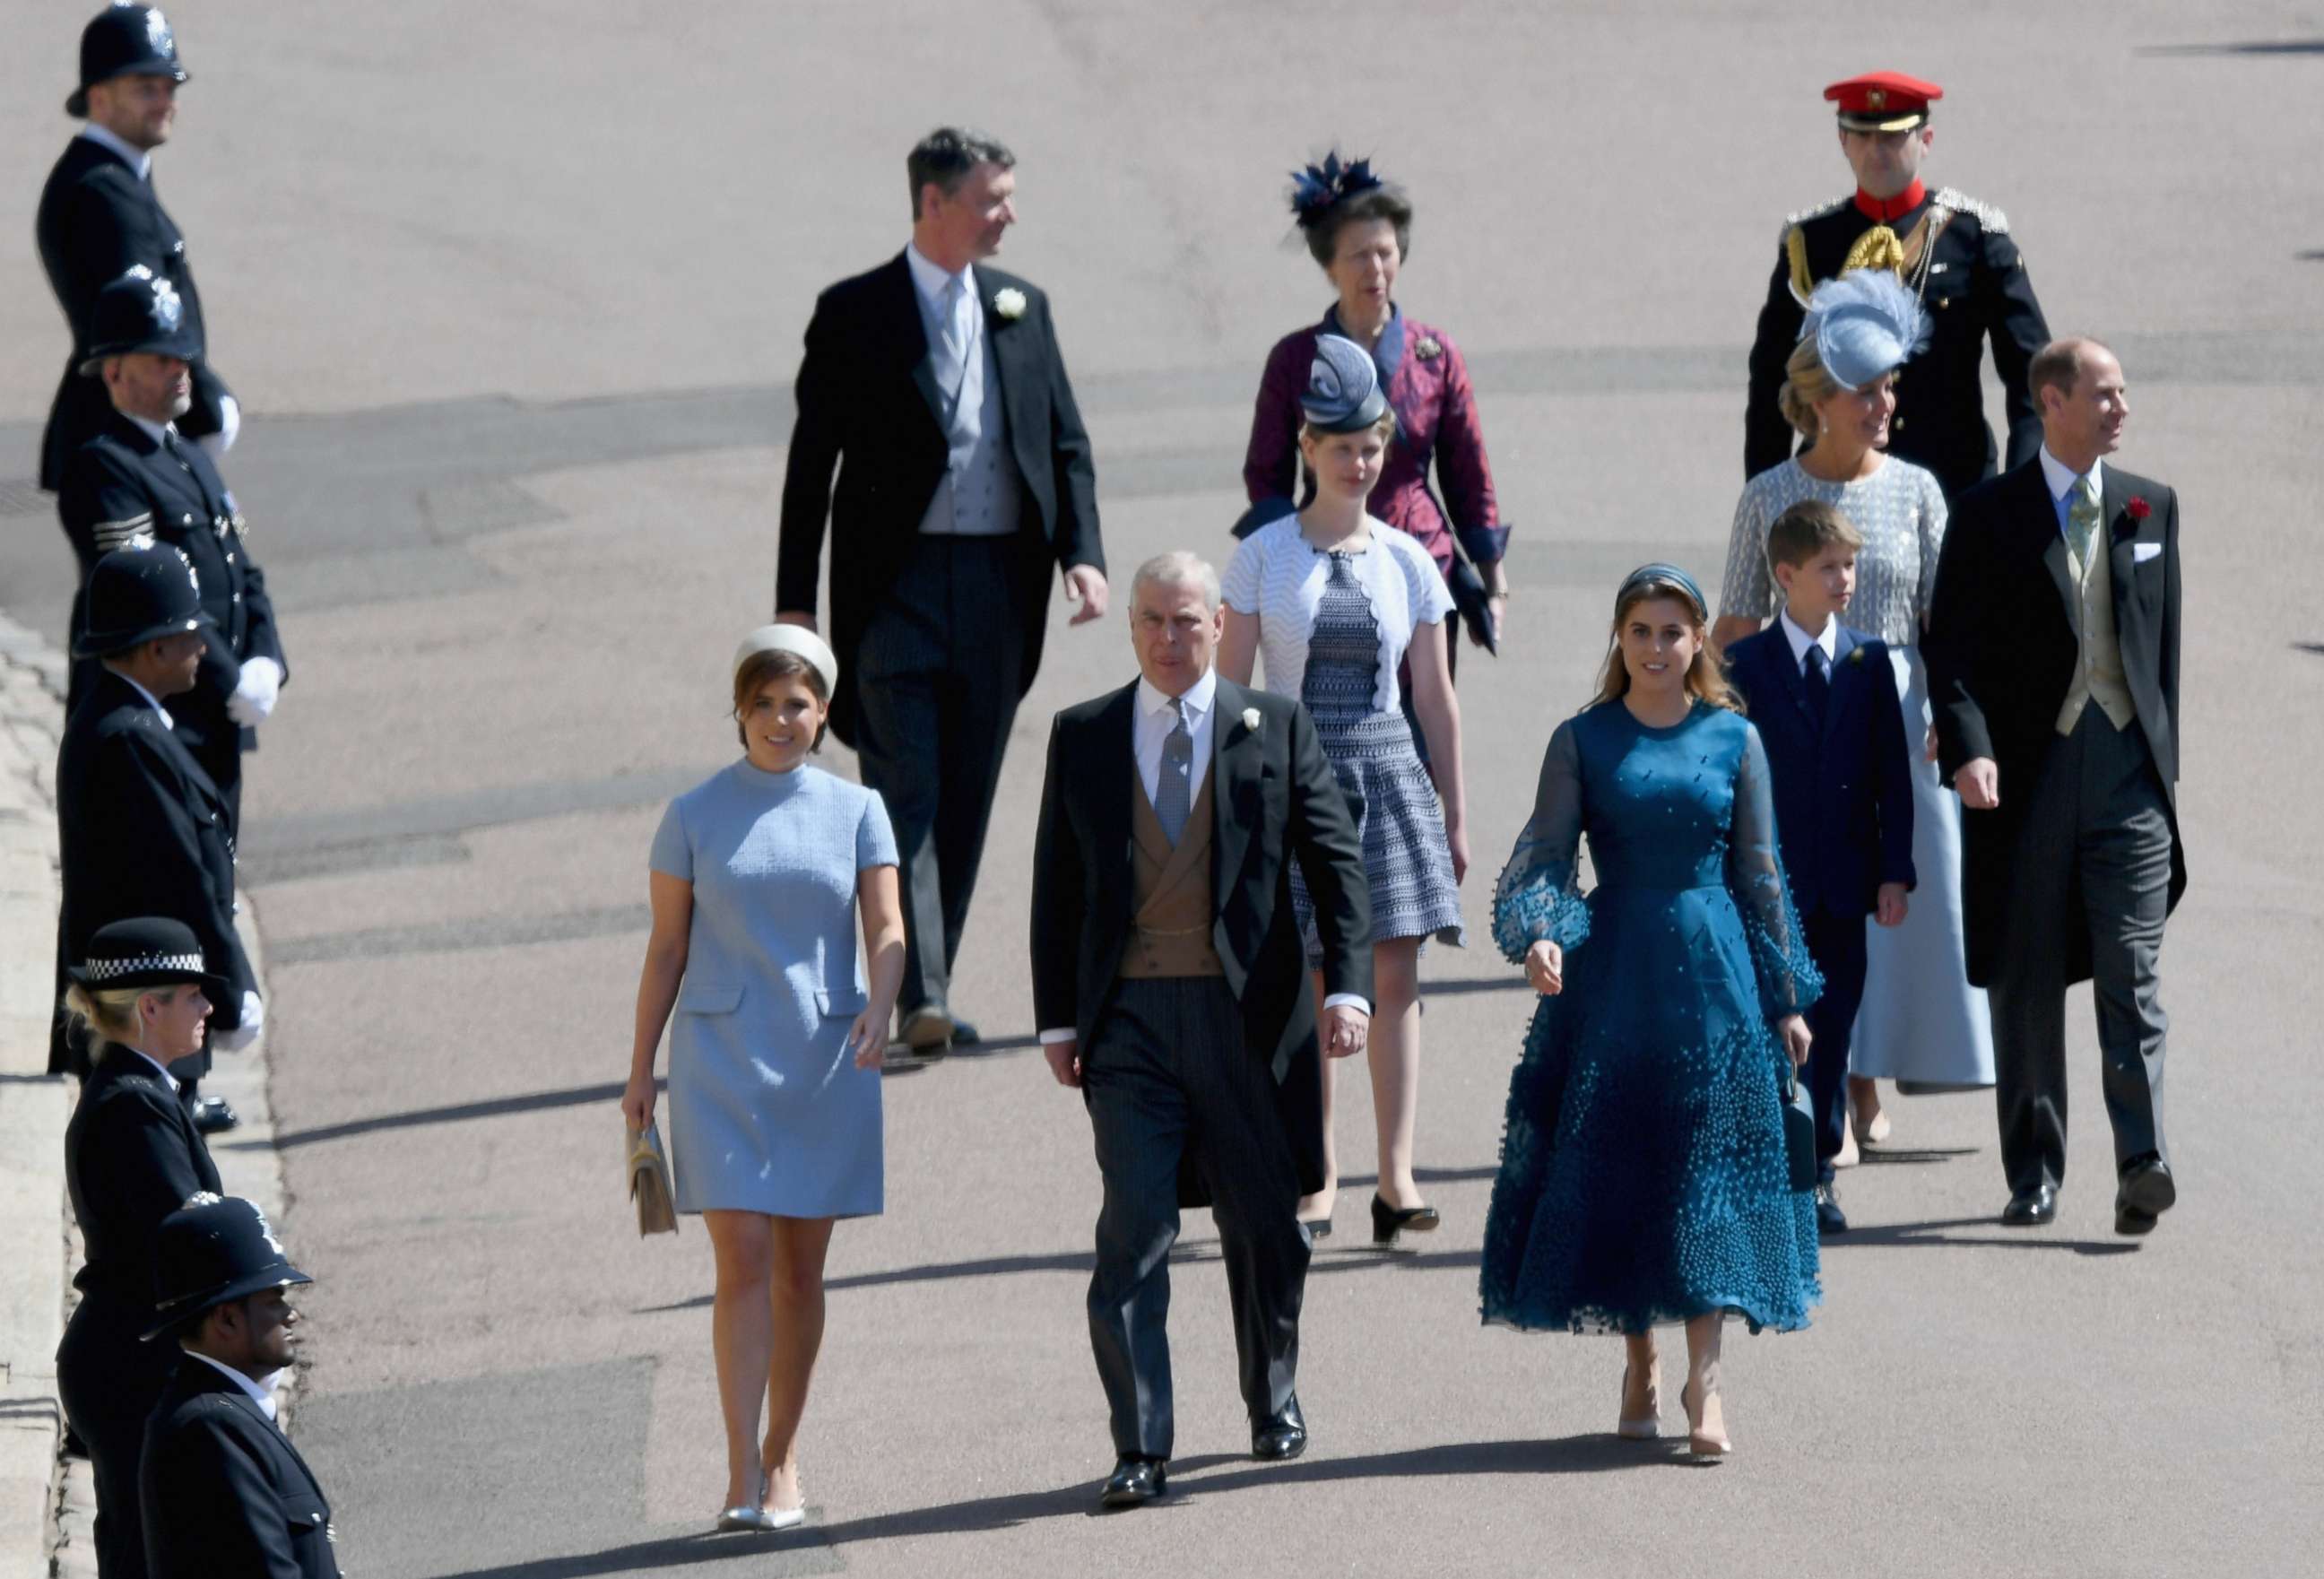 PHOTO: Princess Eugenie, Prince Andrew, Duke of York and Princess Beatrice and Princess Anne, Princess Royal (rear) attend the wedding of Prince Harry to Ms Meghan Markle at St George's Chapel, Windsor Castle, May 19, 2018, in Windsor, England.